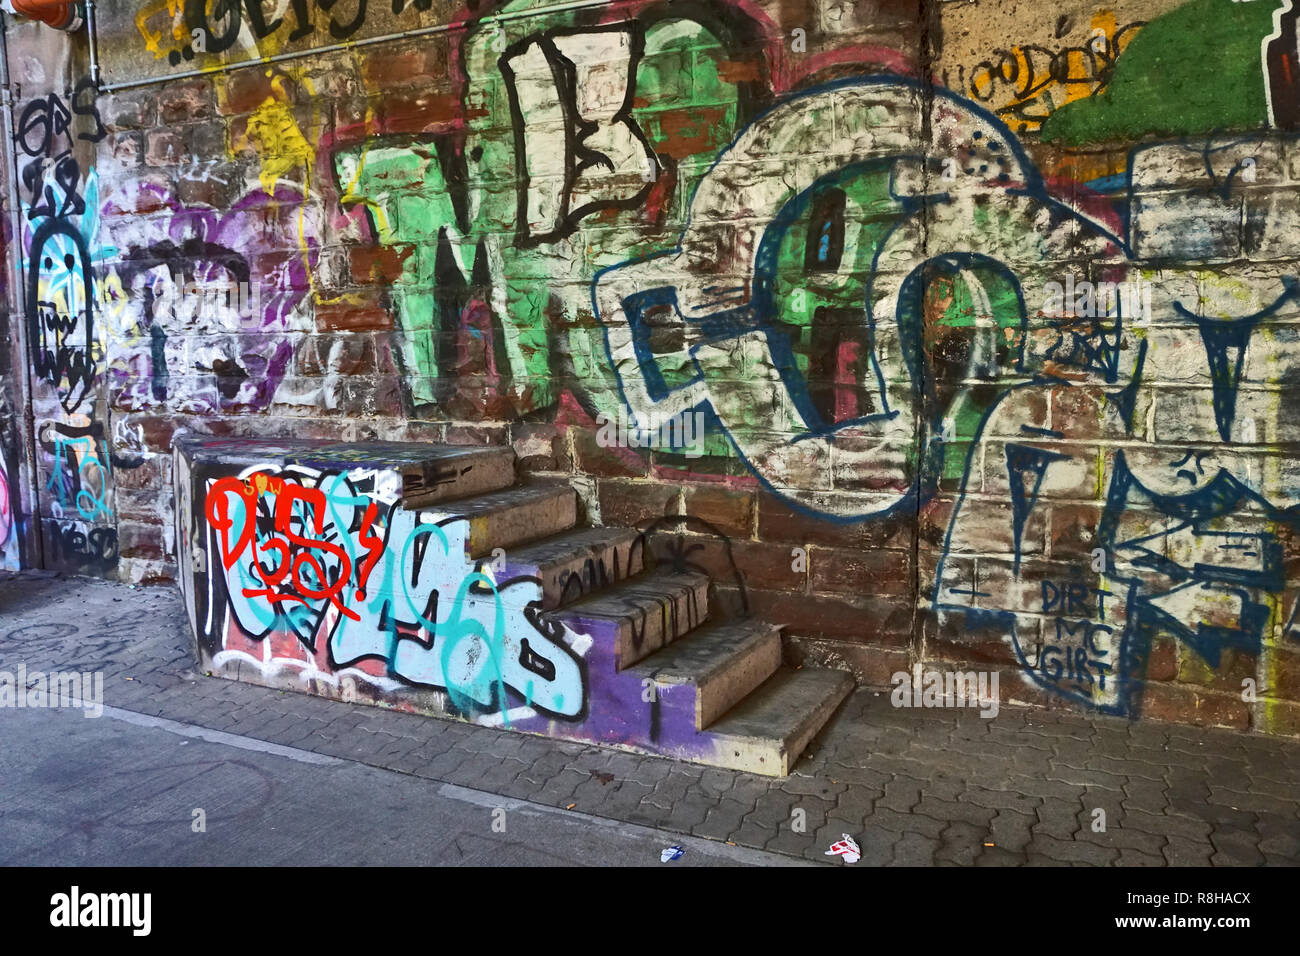 Stairs into nowhere, wall and steps decorated with graffiti - Karlsruhe, Germany Stock Photo